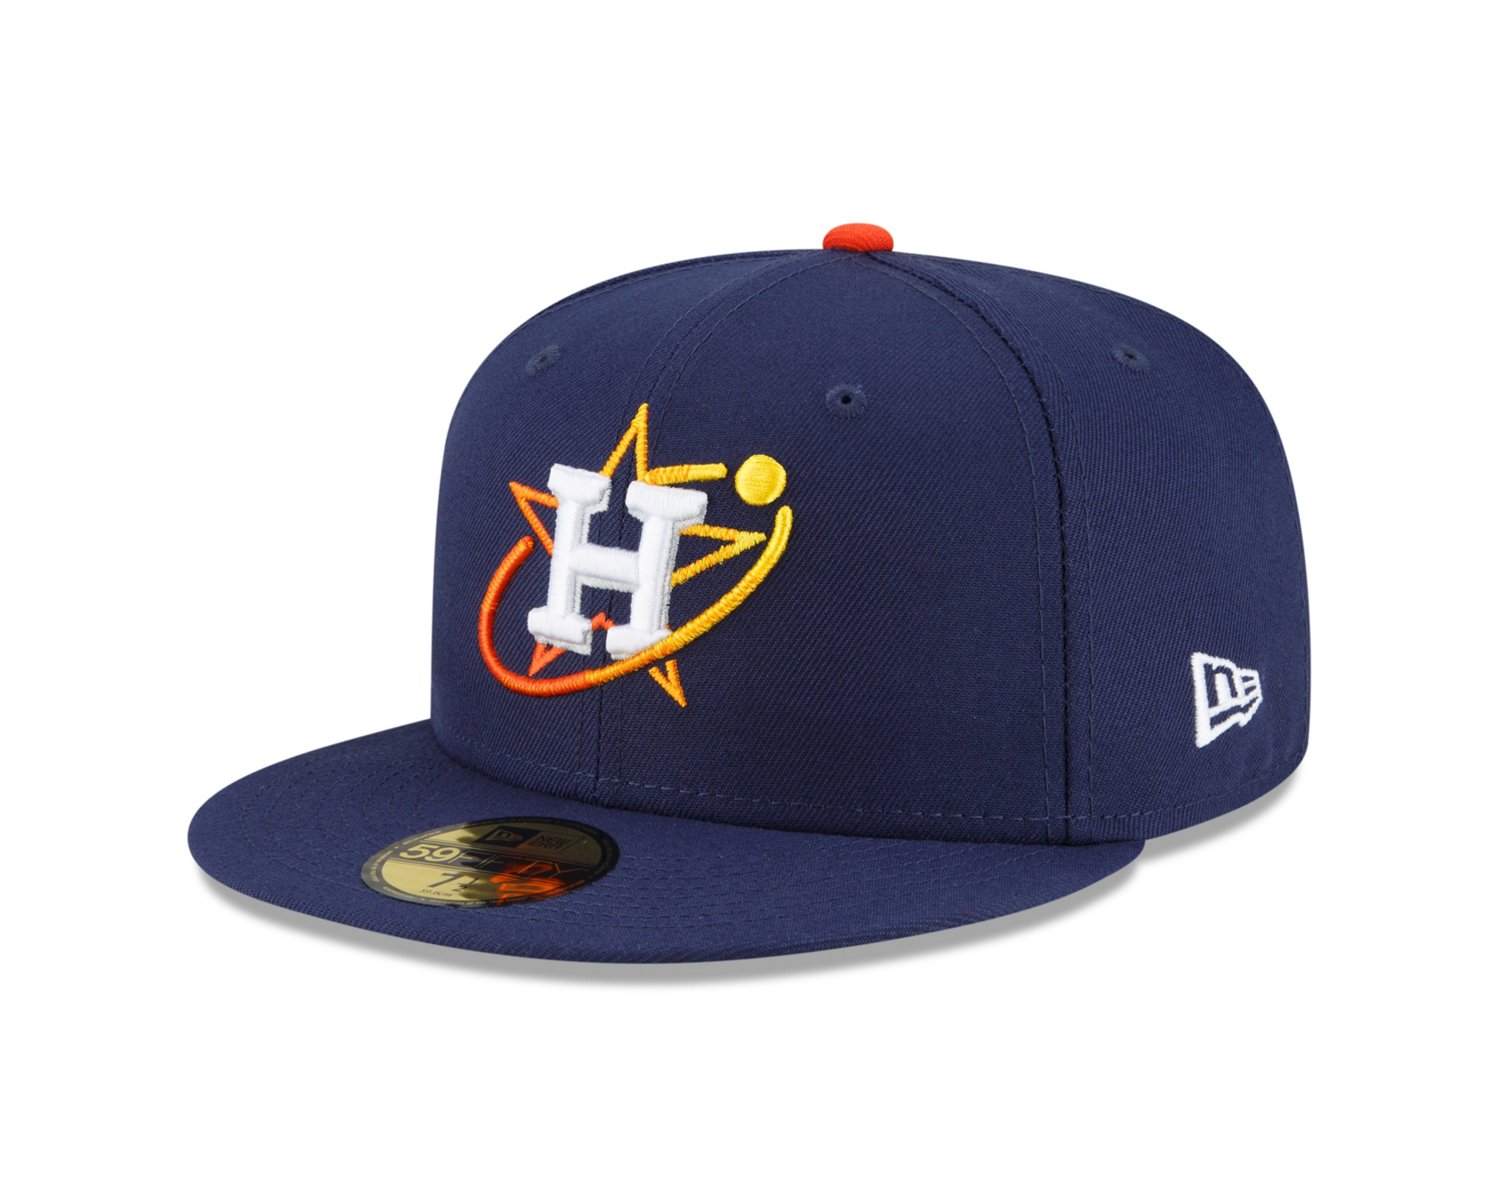 Blue Nike MLB Houston Astros City Connect Jersey